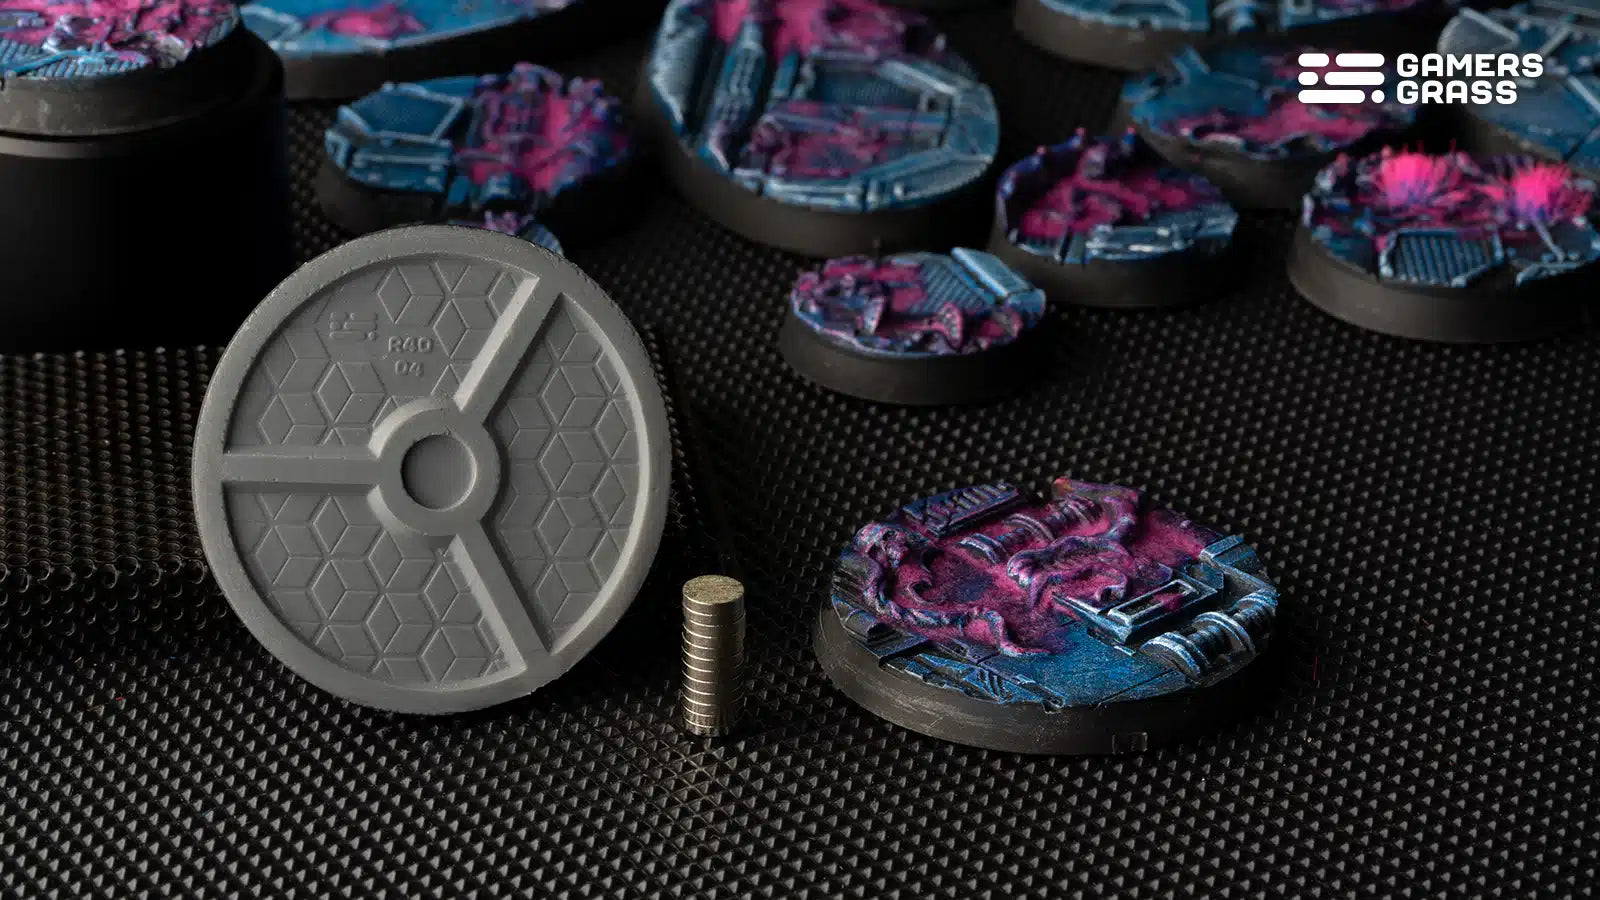 Battle Ready Bases Alien Infestation Round 40mm (x5) - Loaded Dice Barry Vale of Glamorgan CF64 3HD